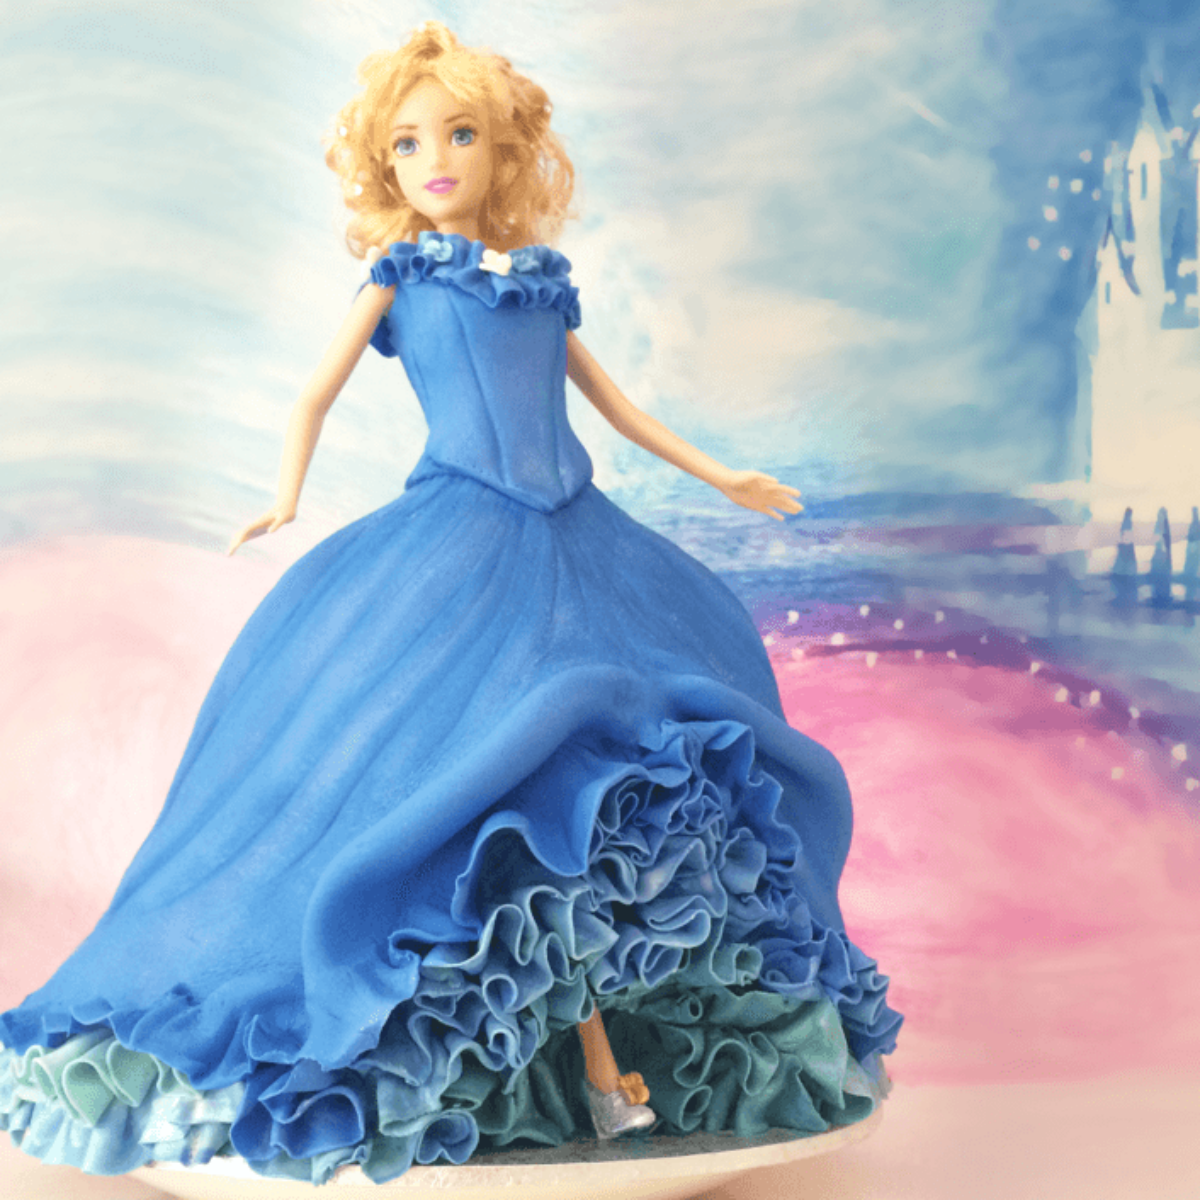 NEW Cinderella Barbie Twirling Dress Cake  How To With The Icing Artist   YouTube